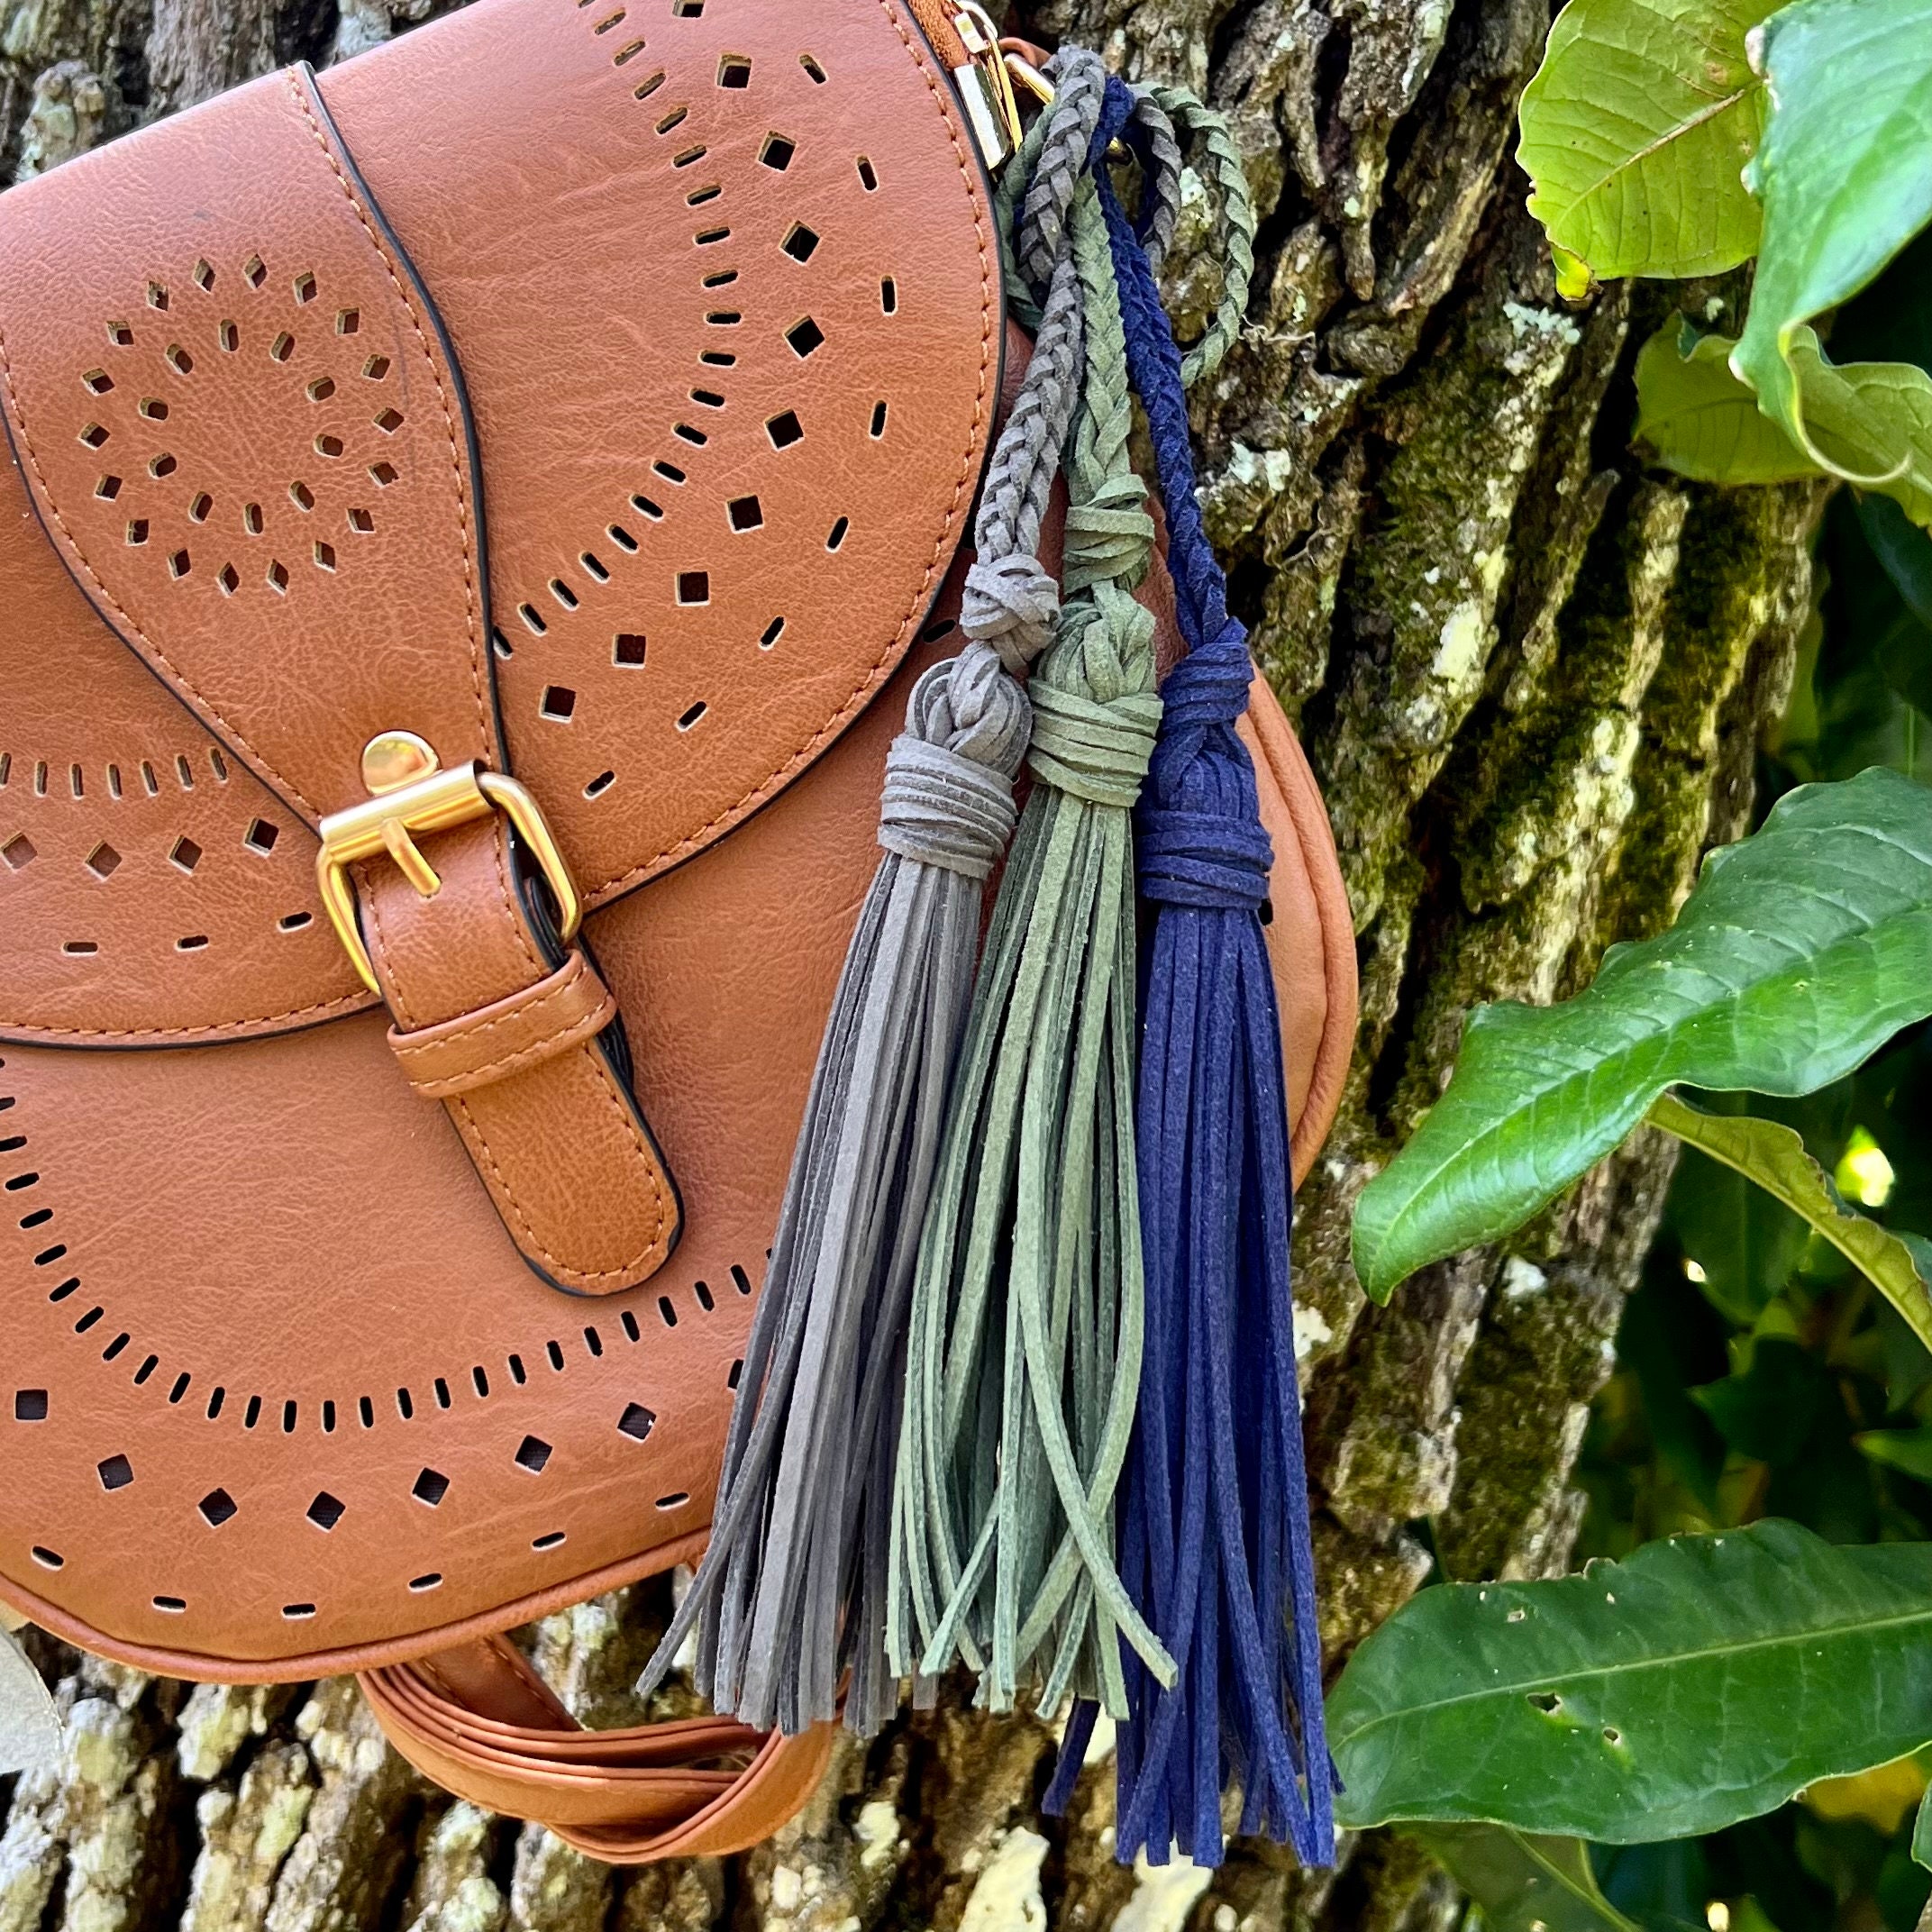 Leather Cross Body Suede Bag Yes for Tassel Charm / Gray